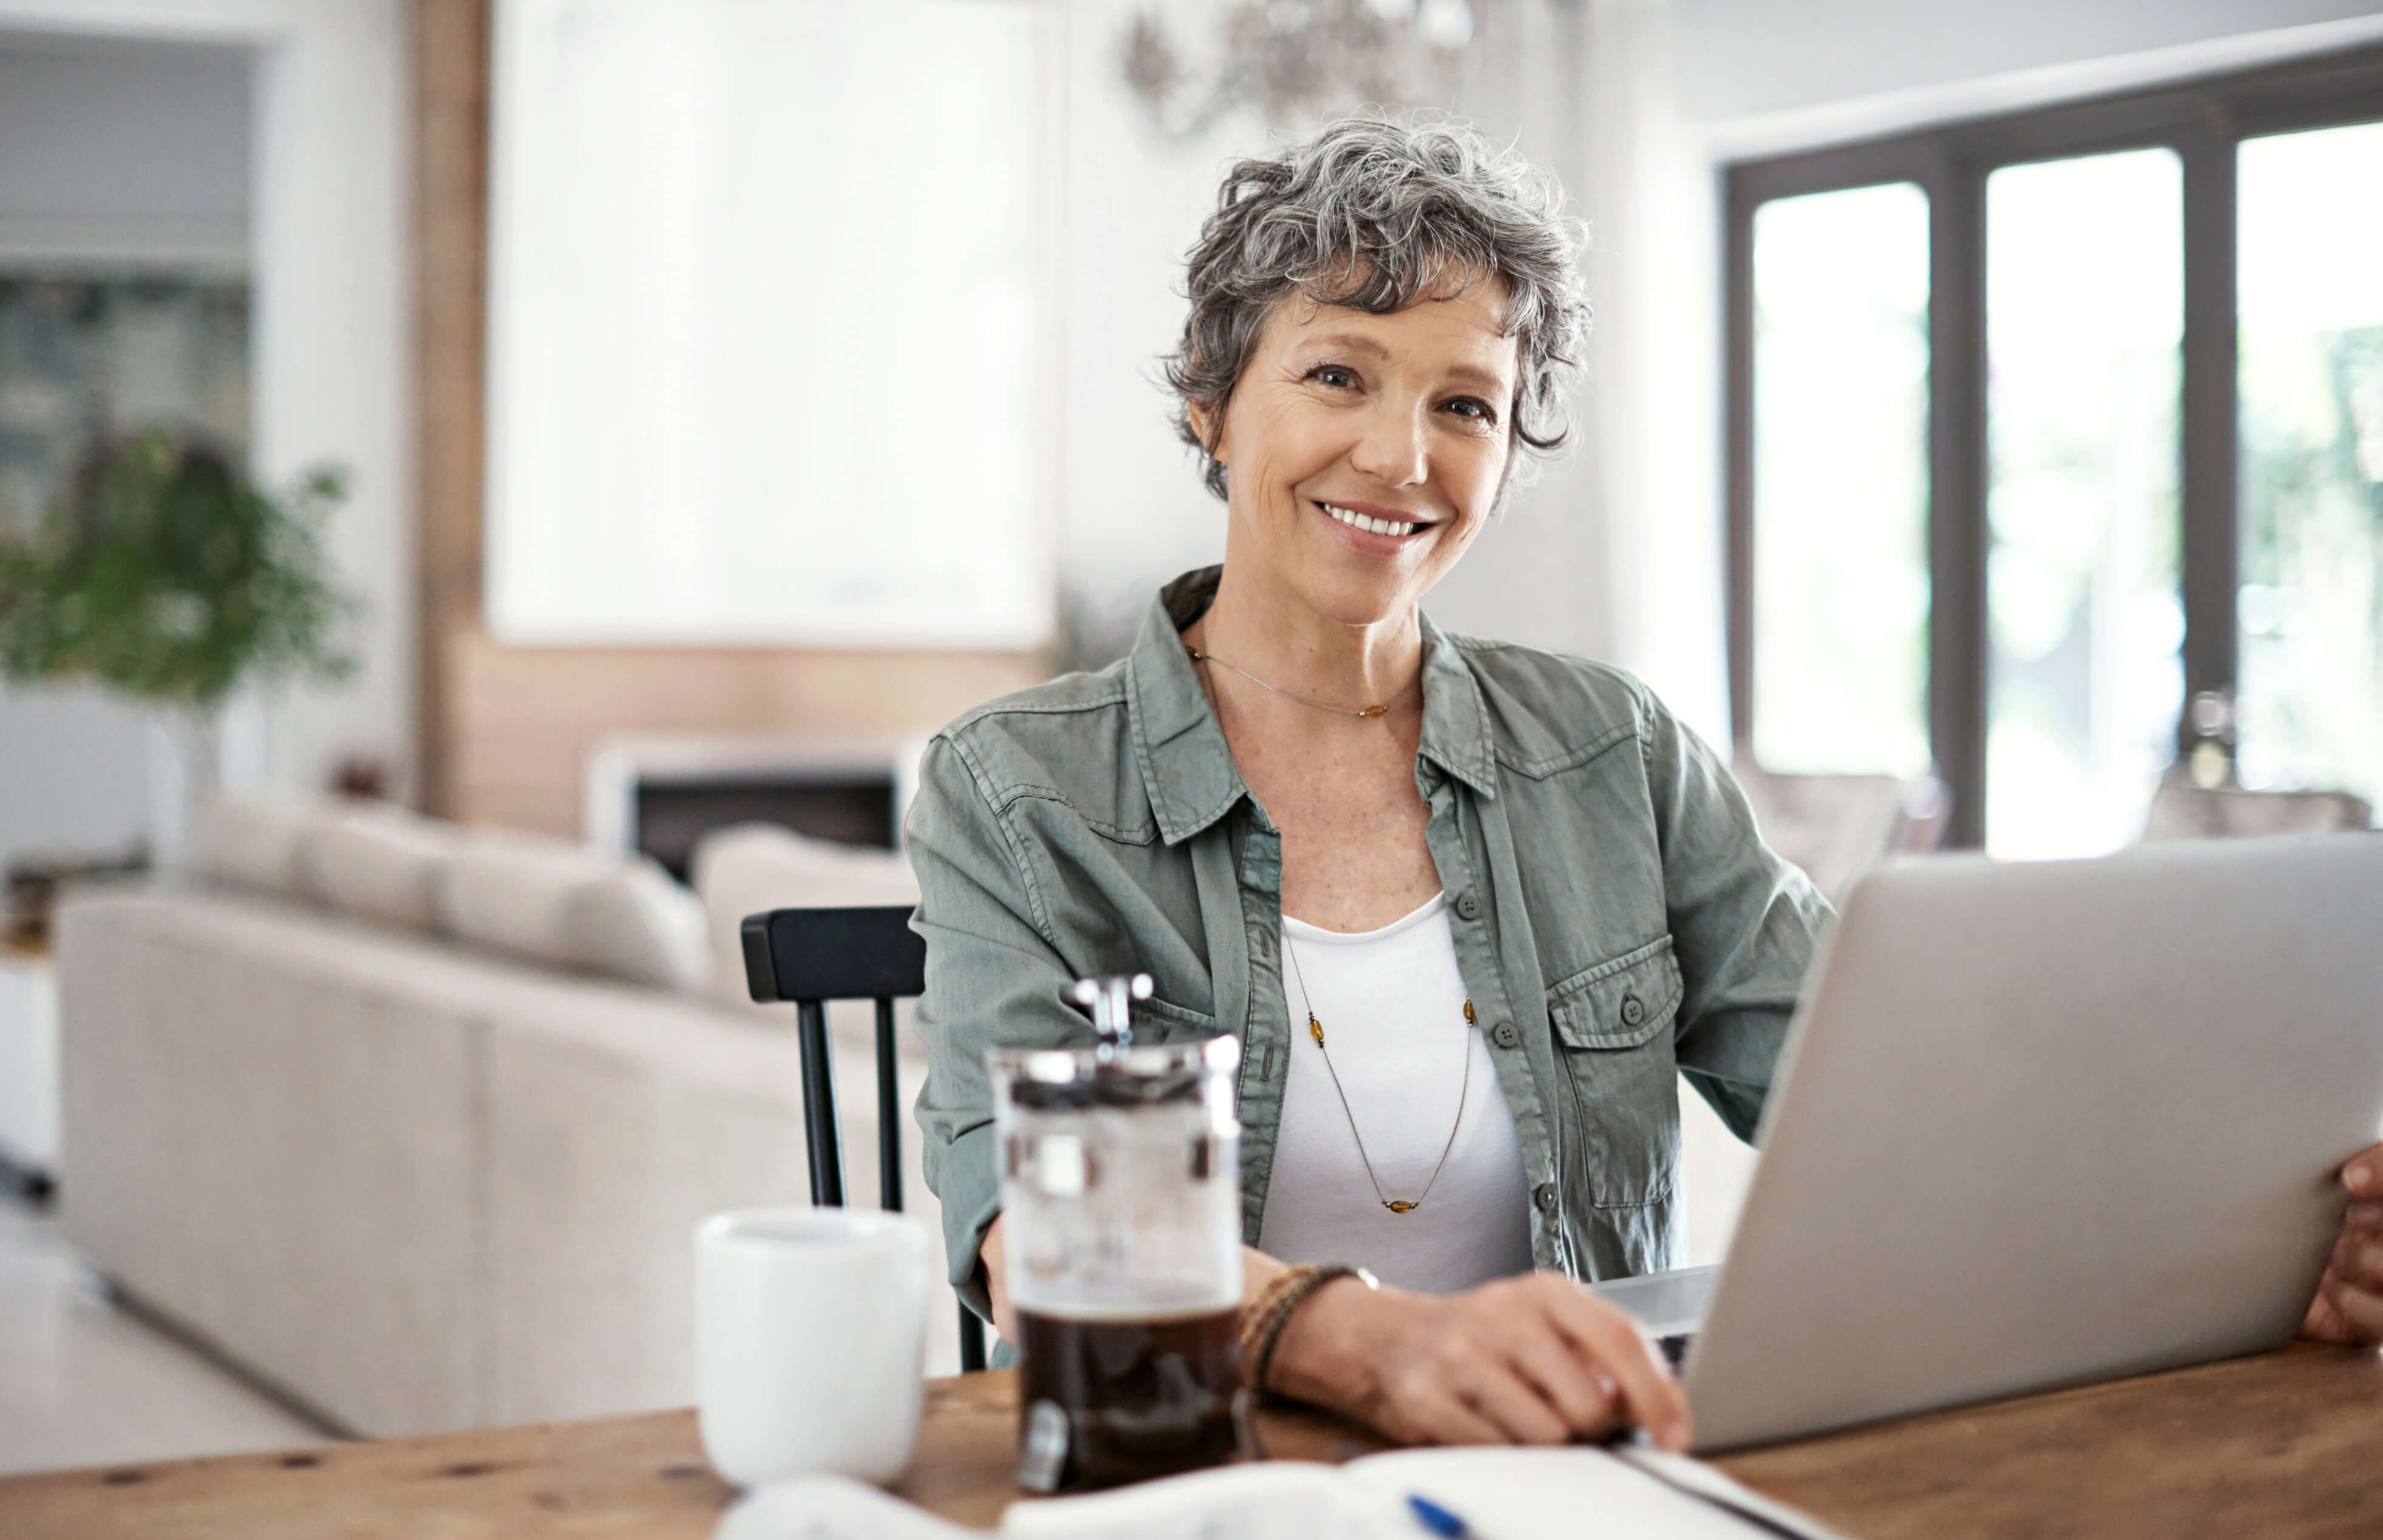 Sitting in front of her laptop at the dining room table, woman smiles. A disability lawyer can help you understand how to apply for Social Security Disability in Alabama.